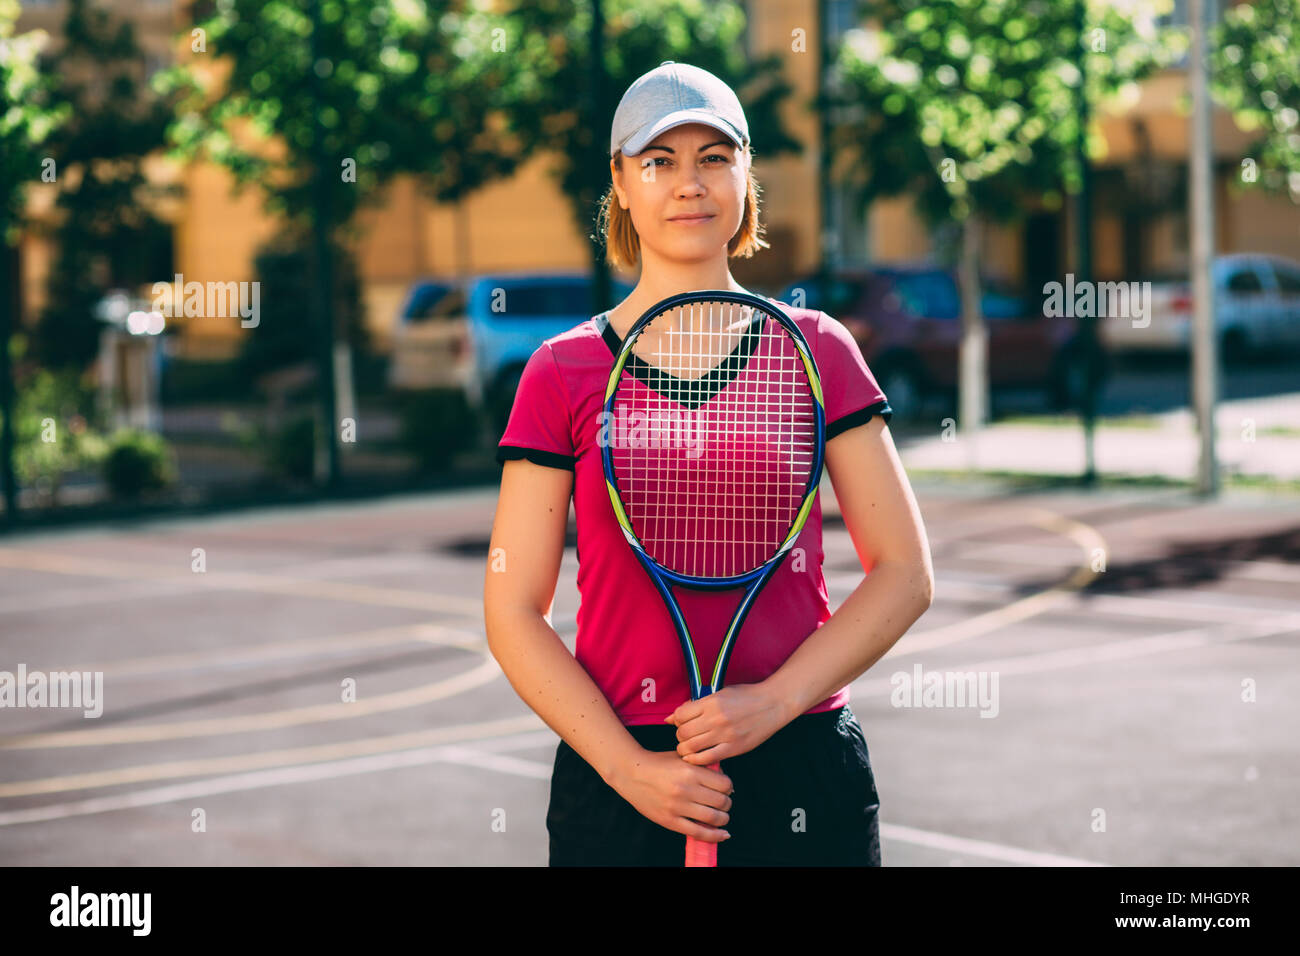 portrait of a woman with a tennis racket in her hands, standing on a tennis court. practice tennis, outdoor Stock Photo